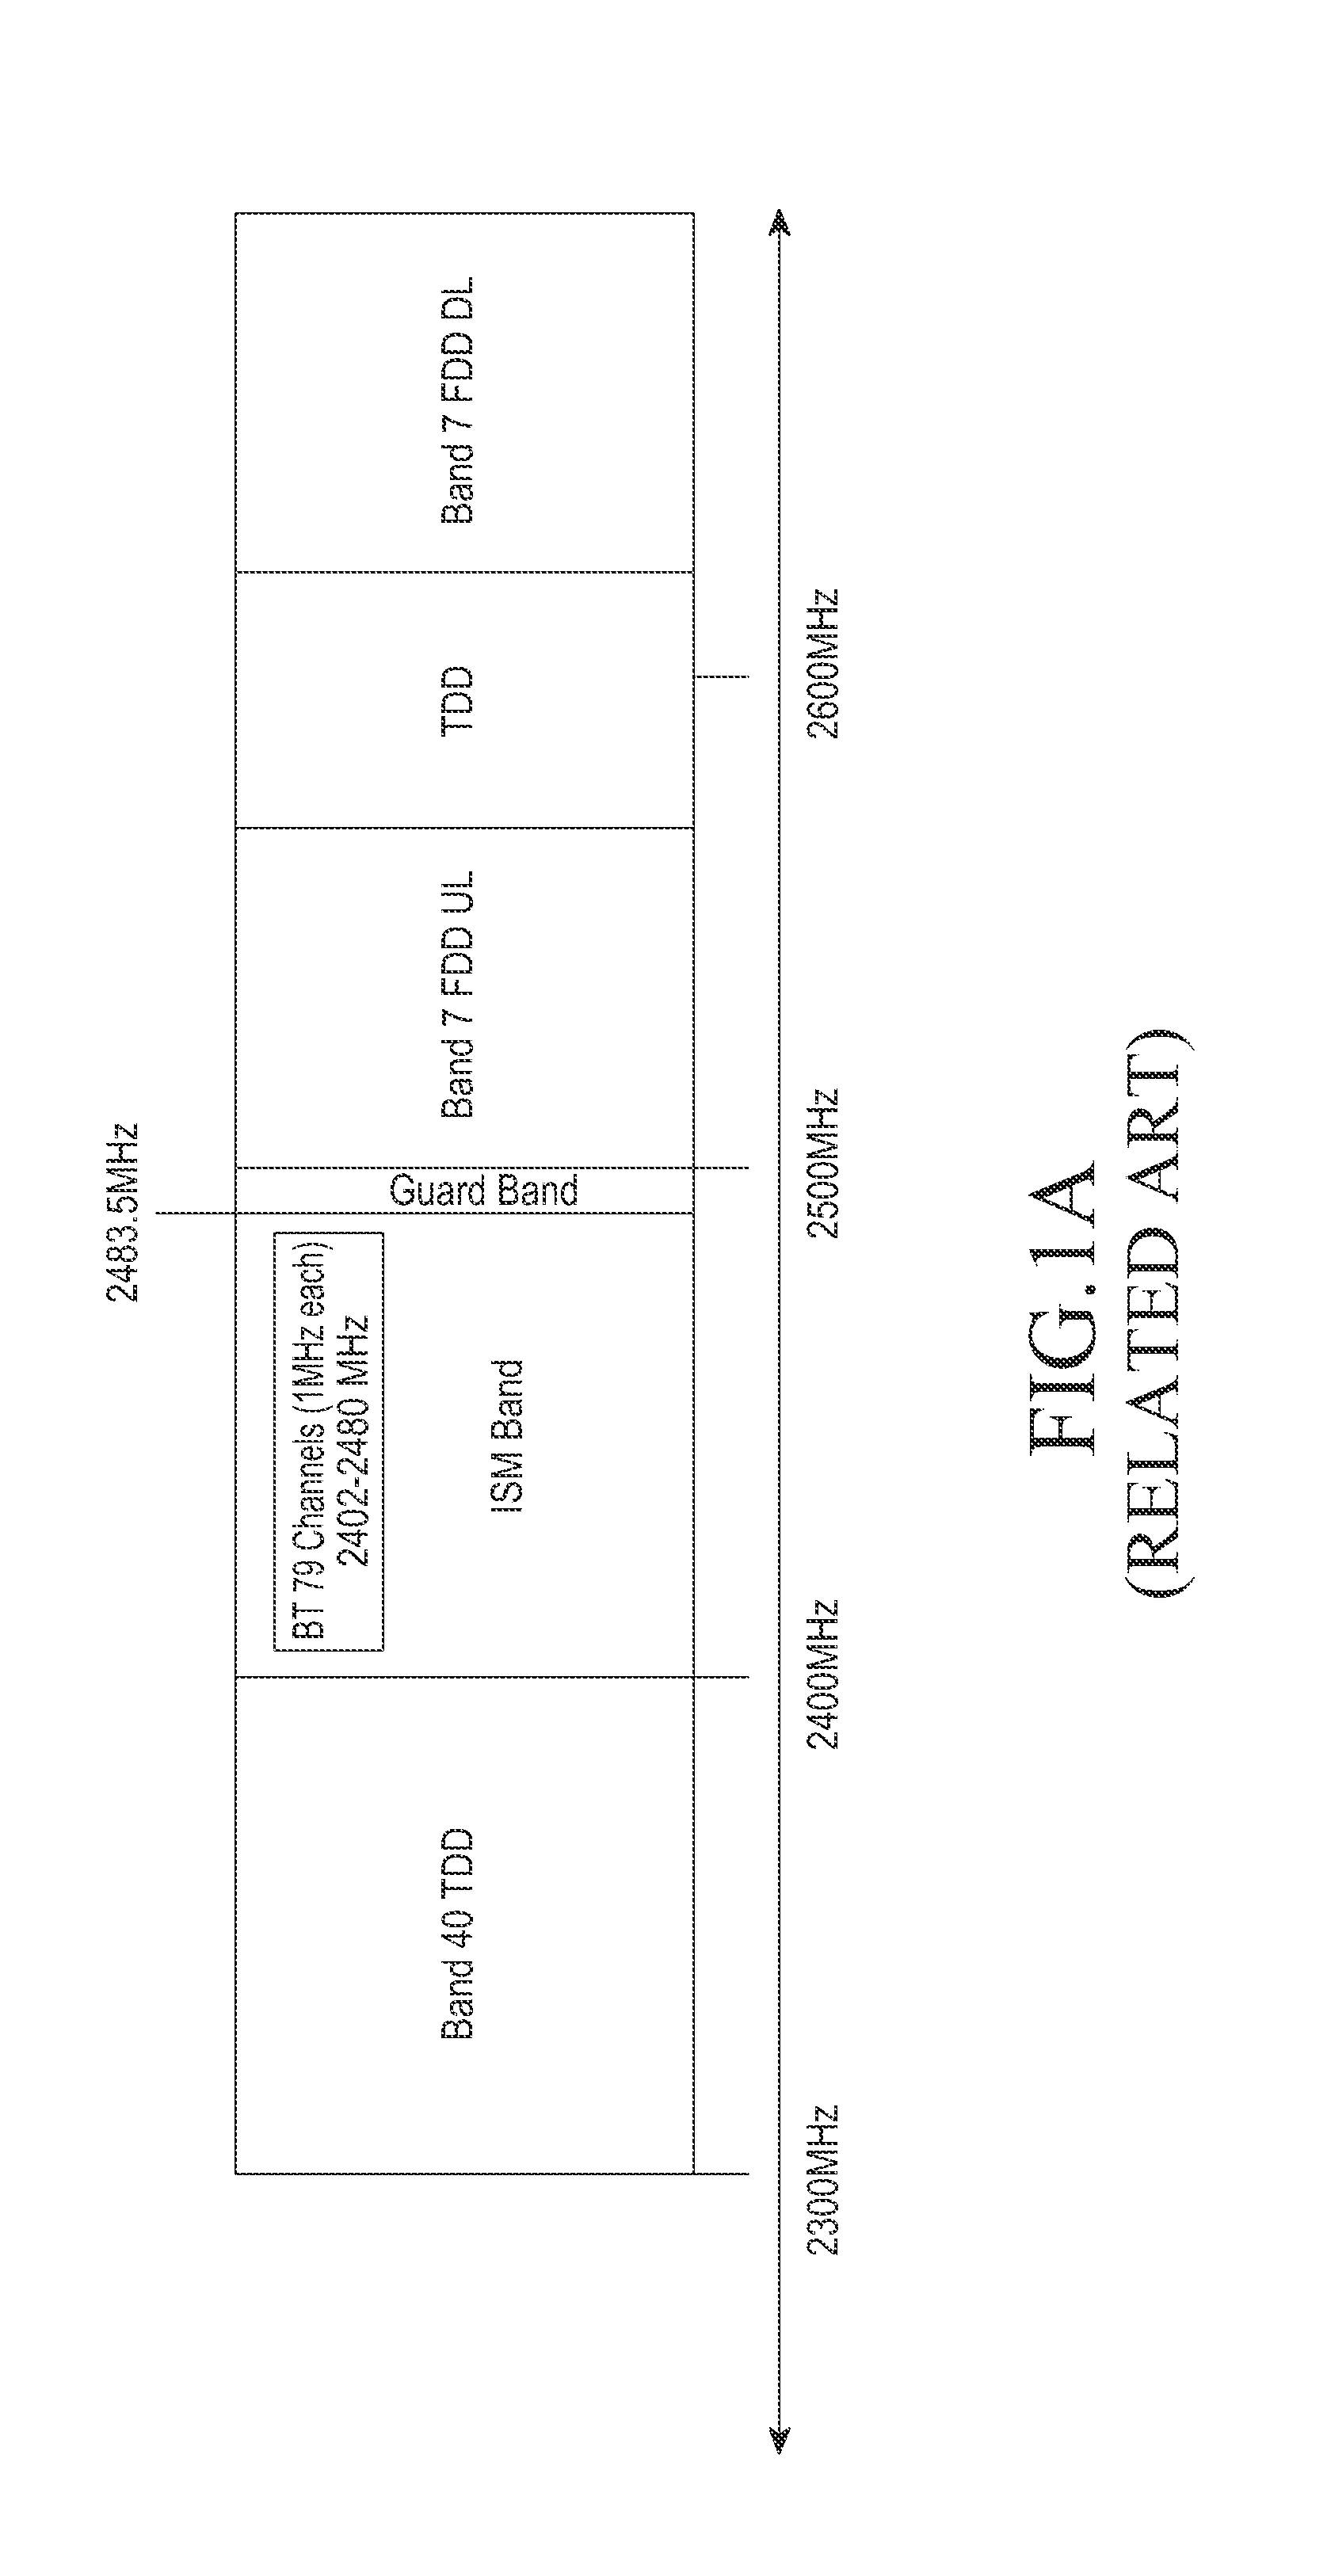 Method and apparatus of handling in-device co-existence interference in a multi-radio environment